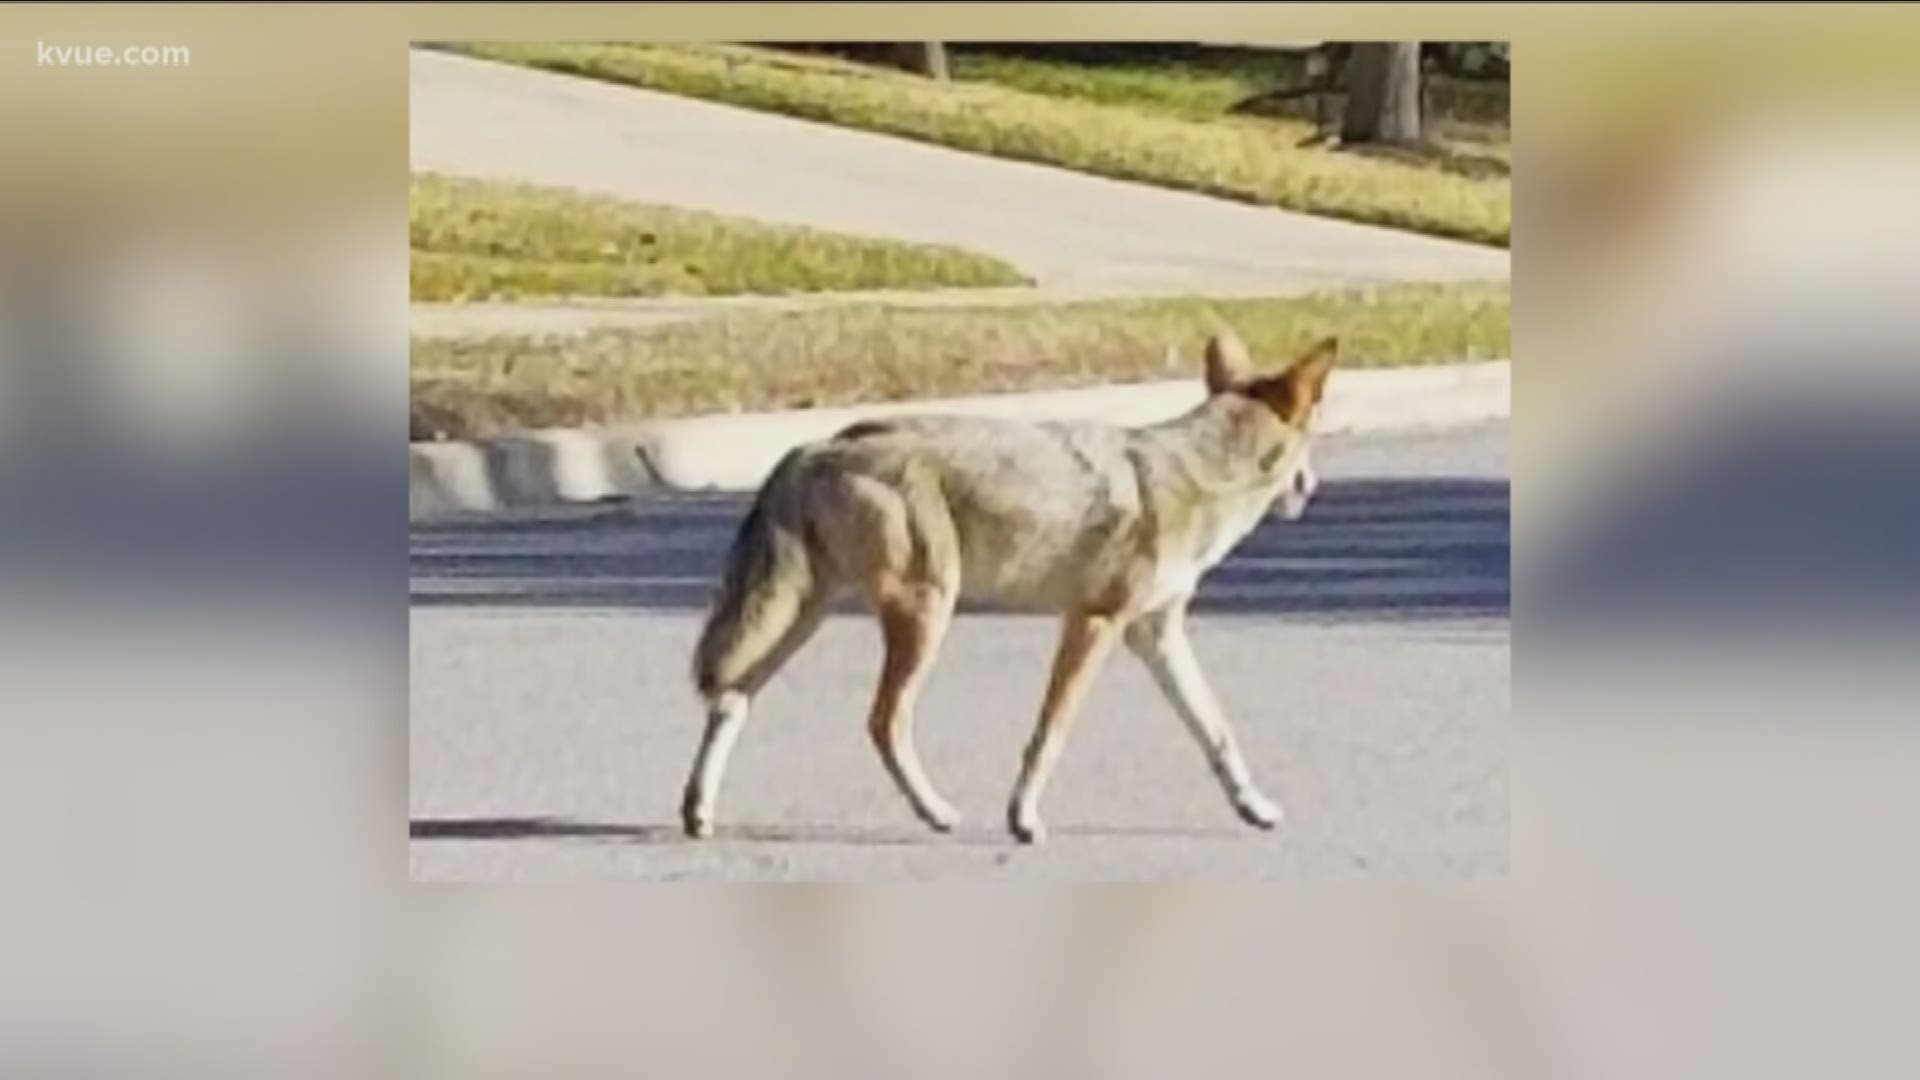 The Williamson County Sheriff's Office said a coyote attacked a man in the Teravista neighborhood in Round Rock.